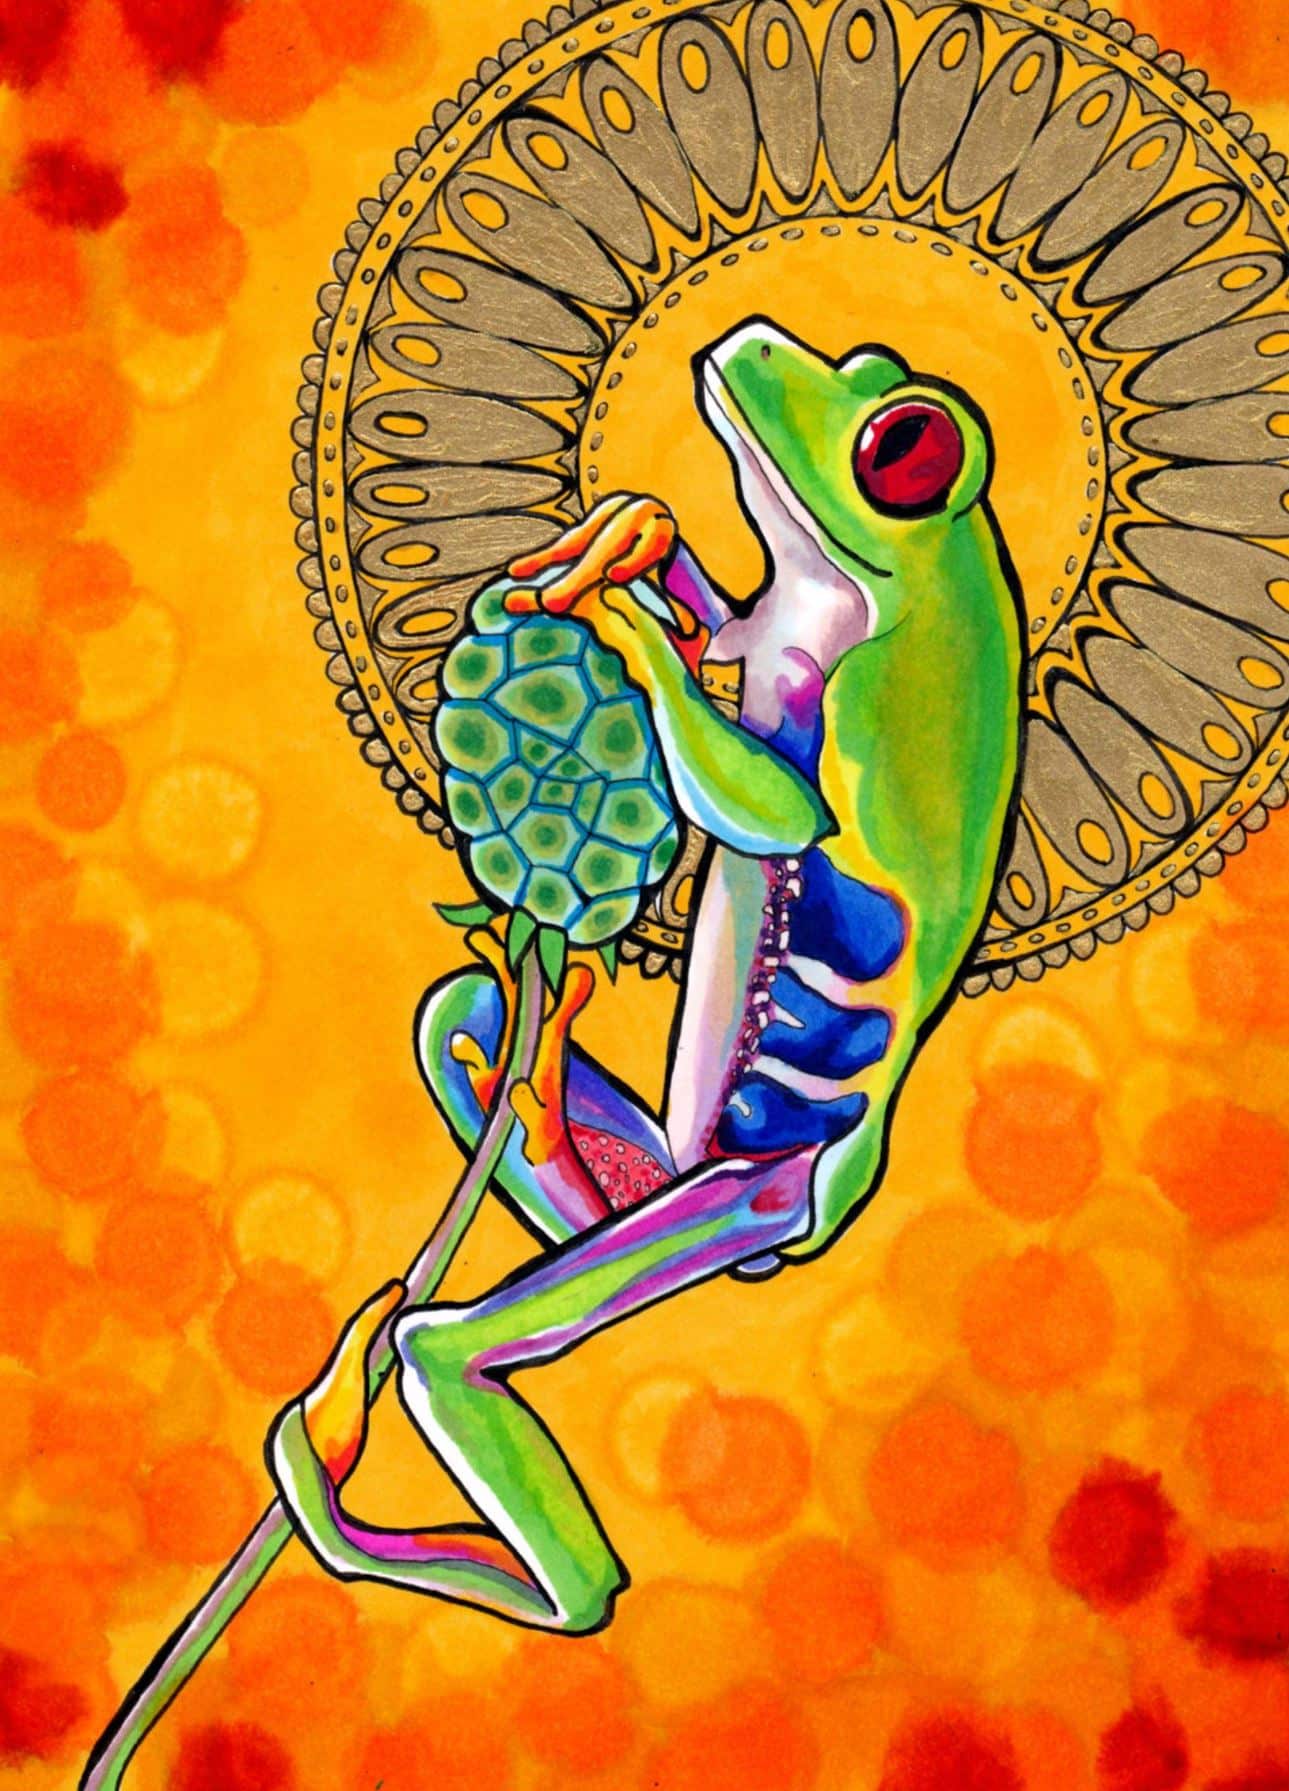 Psychedelic tree frog